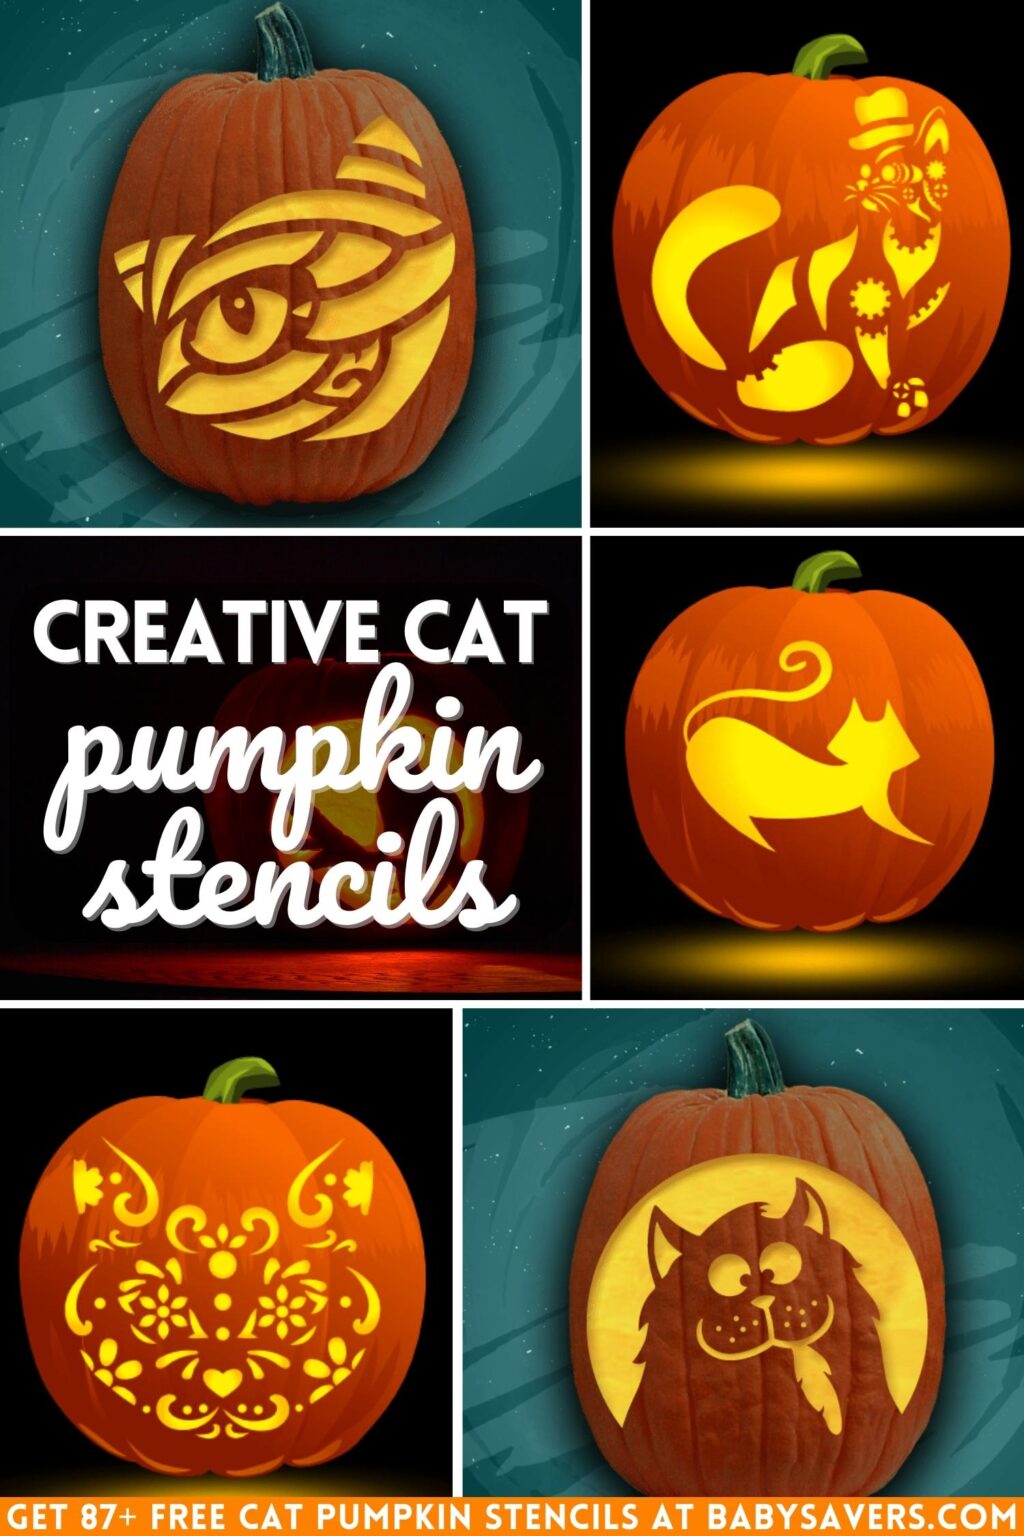 87 Free Cat Pumpkin Carving Stencils - The Ultimate List!